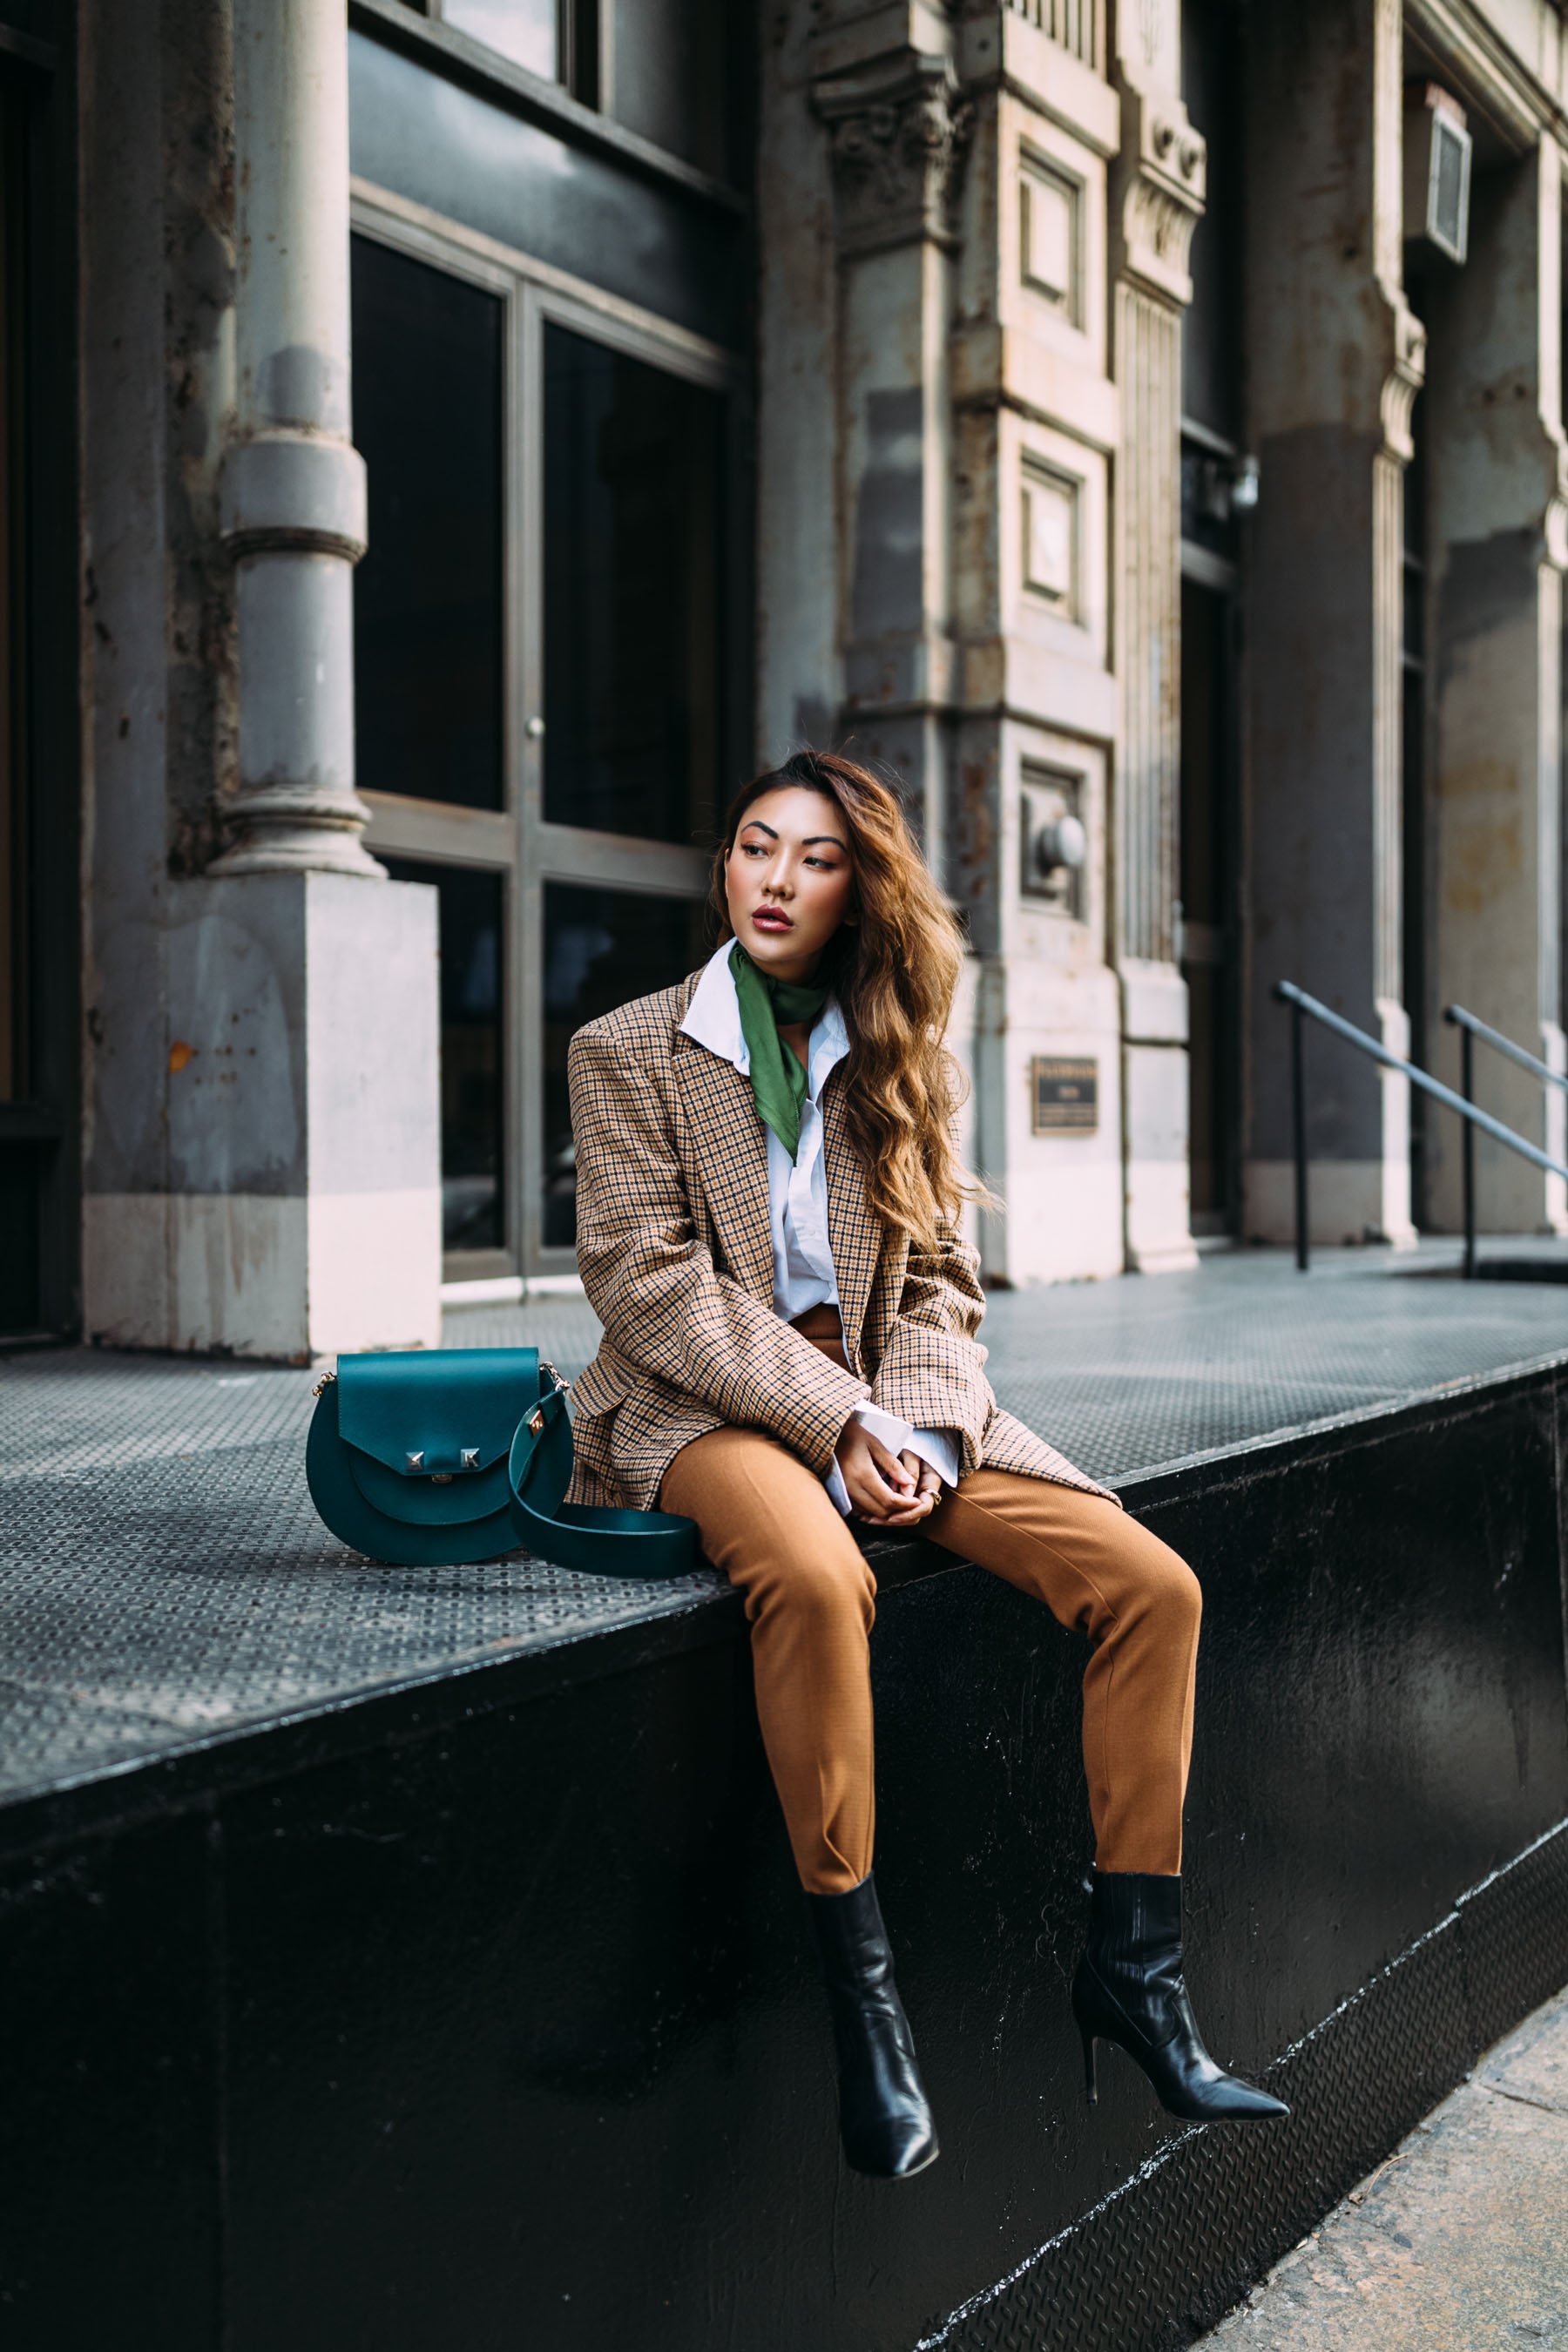 How to add color to your winter wardrobe - Green neck scarf with plaid blazer // Notjessfashion.com